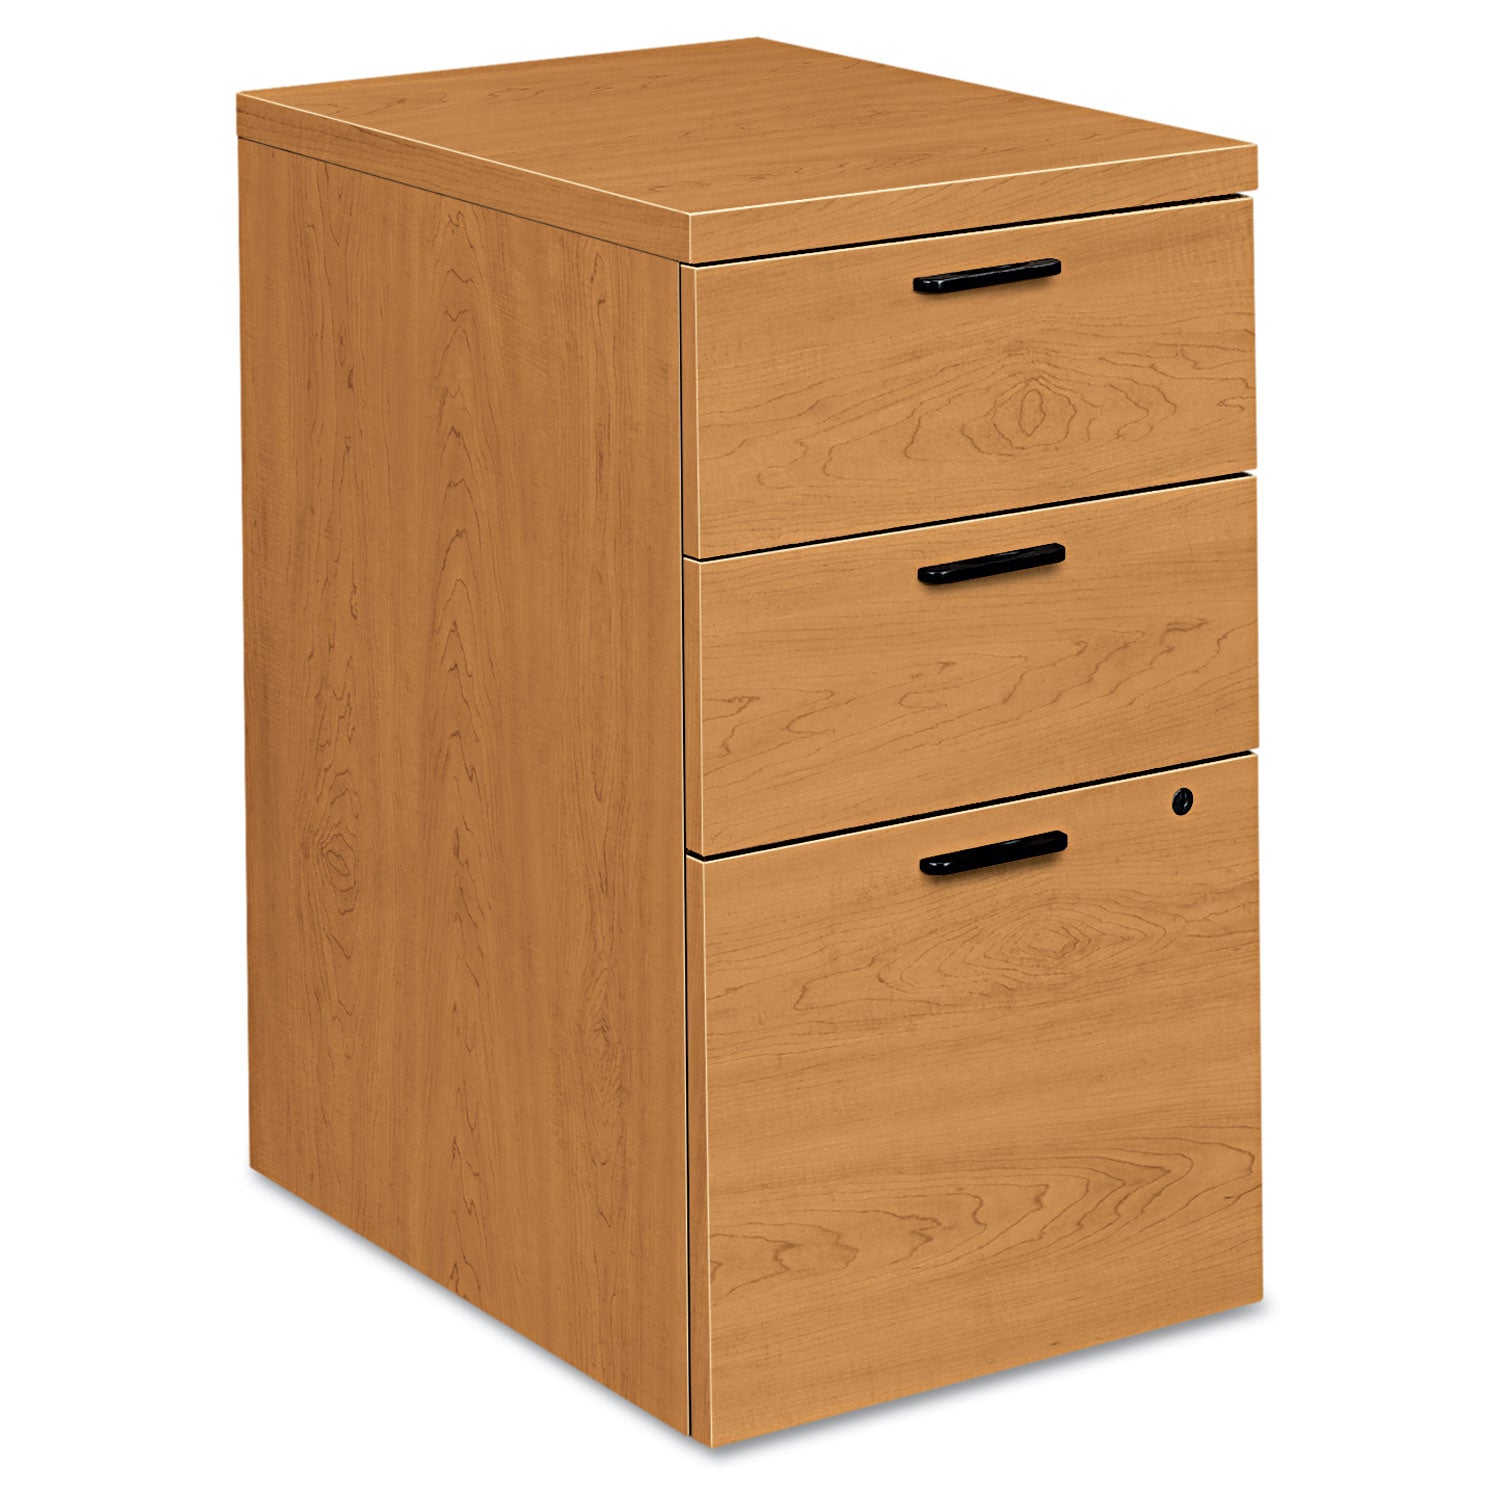 10500 Series Mobile Pedestal File, Left or Right, 3-Drawers: Box/Box/File, Legal/Letter, Harvest, 15.75" x 22.75" x 28 - 